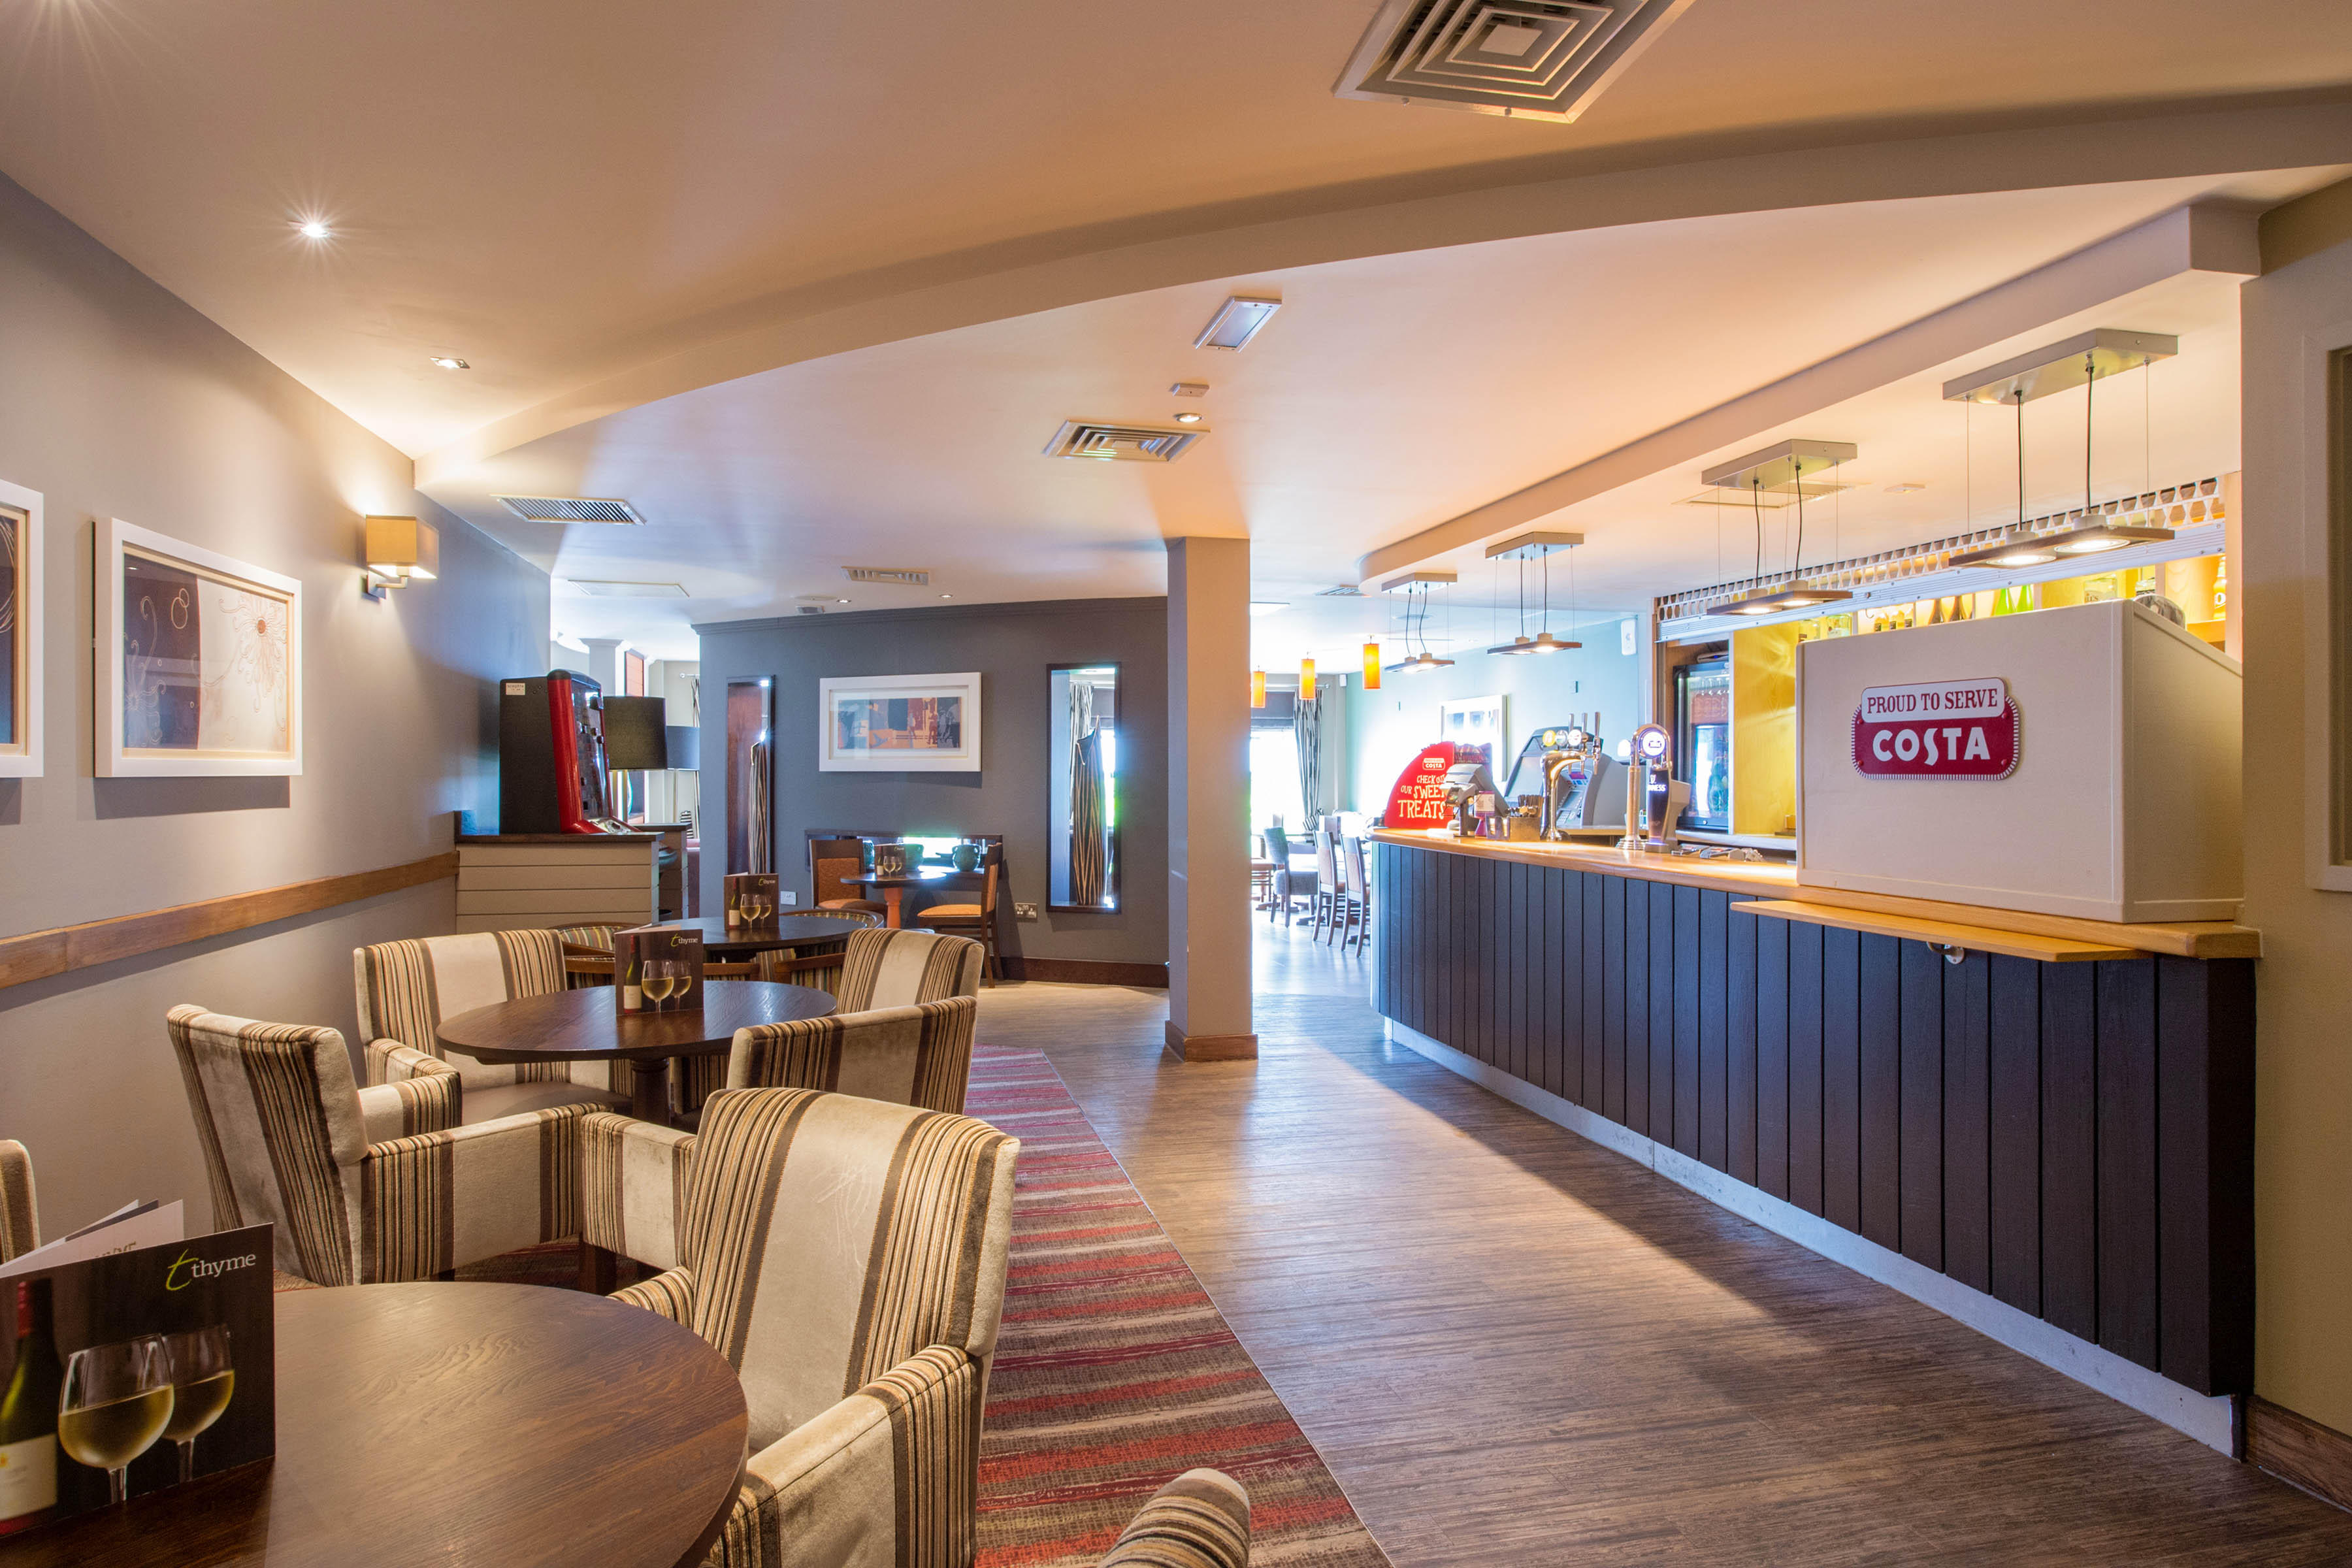 Images Premier Inn Bournemouth Westbourne hotel